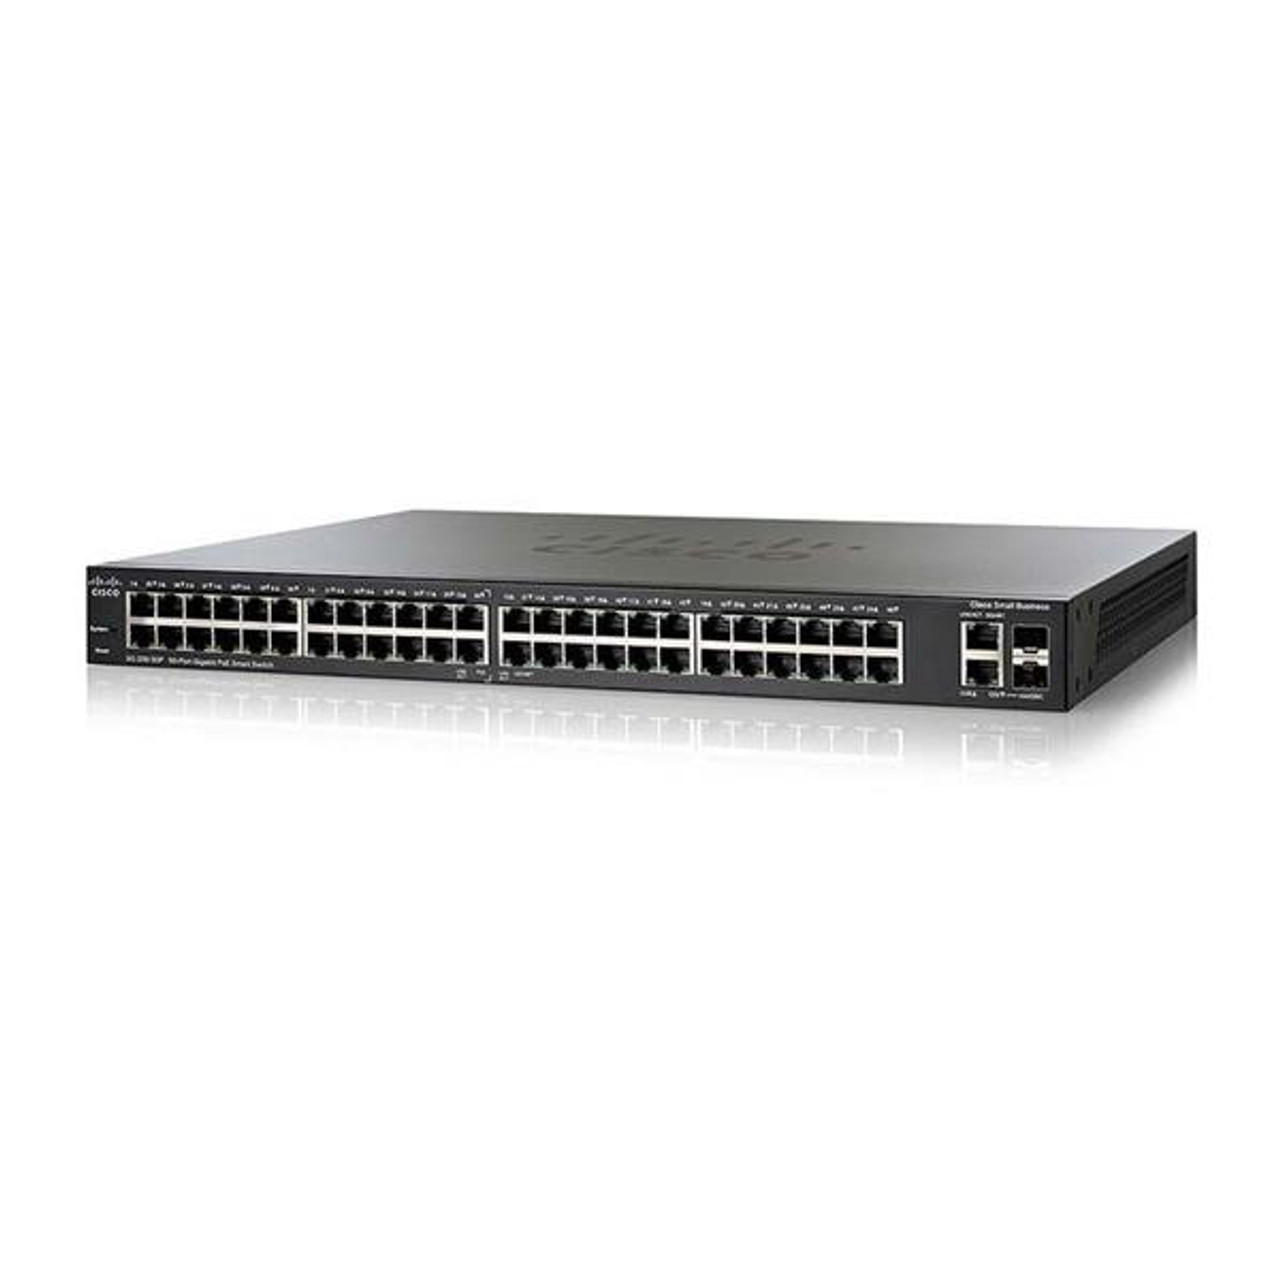 Cisco Small Business SG200-50 50-Ports (24x RJ-45 10Base-T/100Base-TX/1000Base-T and 24x POE with 2x SFP (mini-GBIC) Ports) Managed Switch